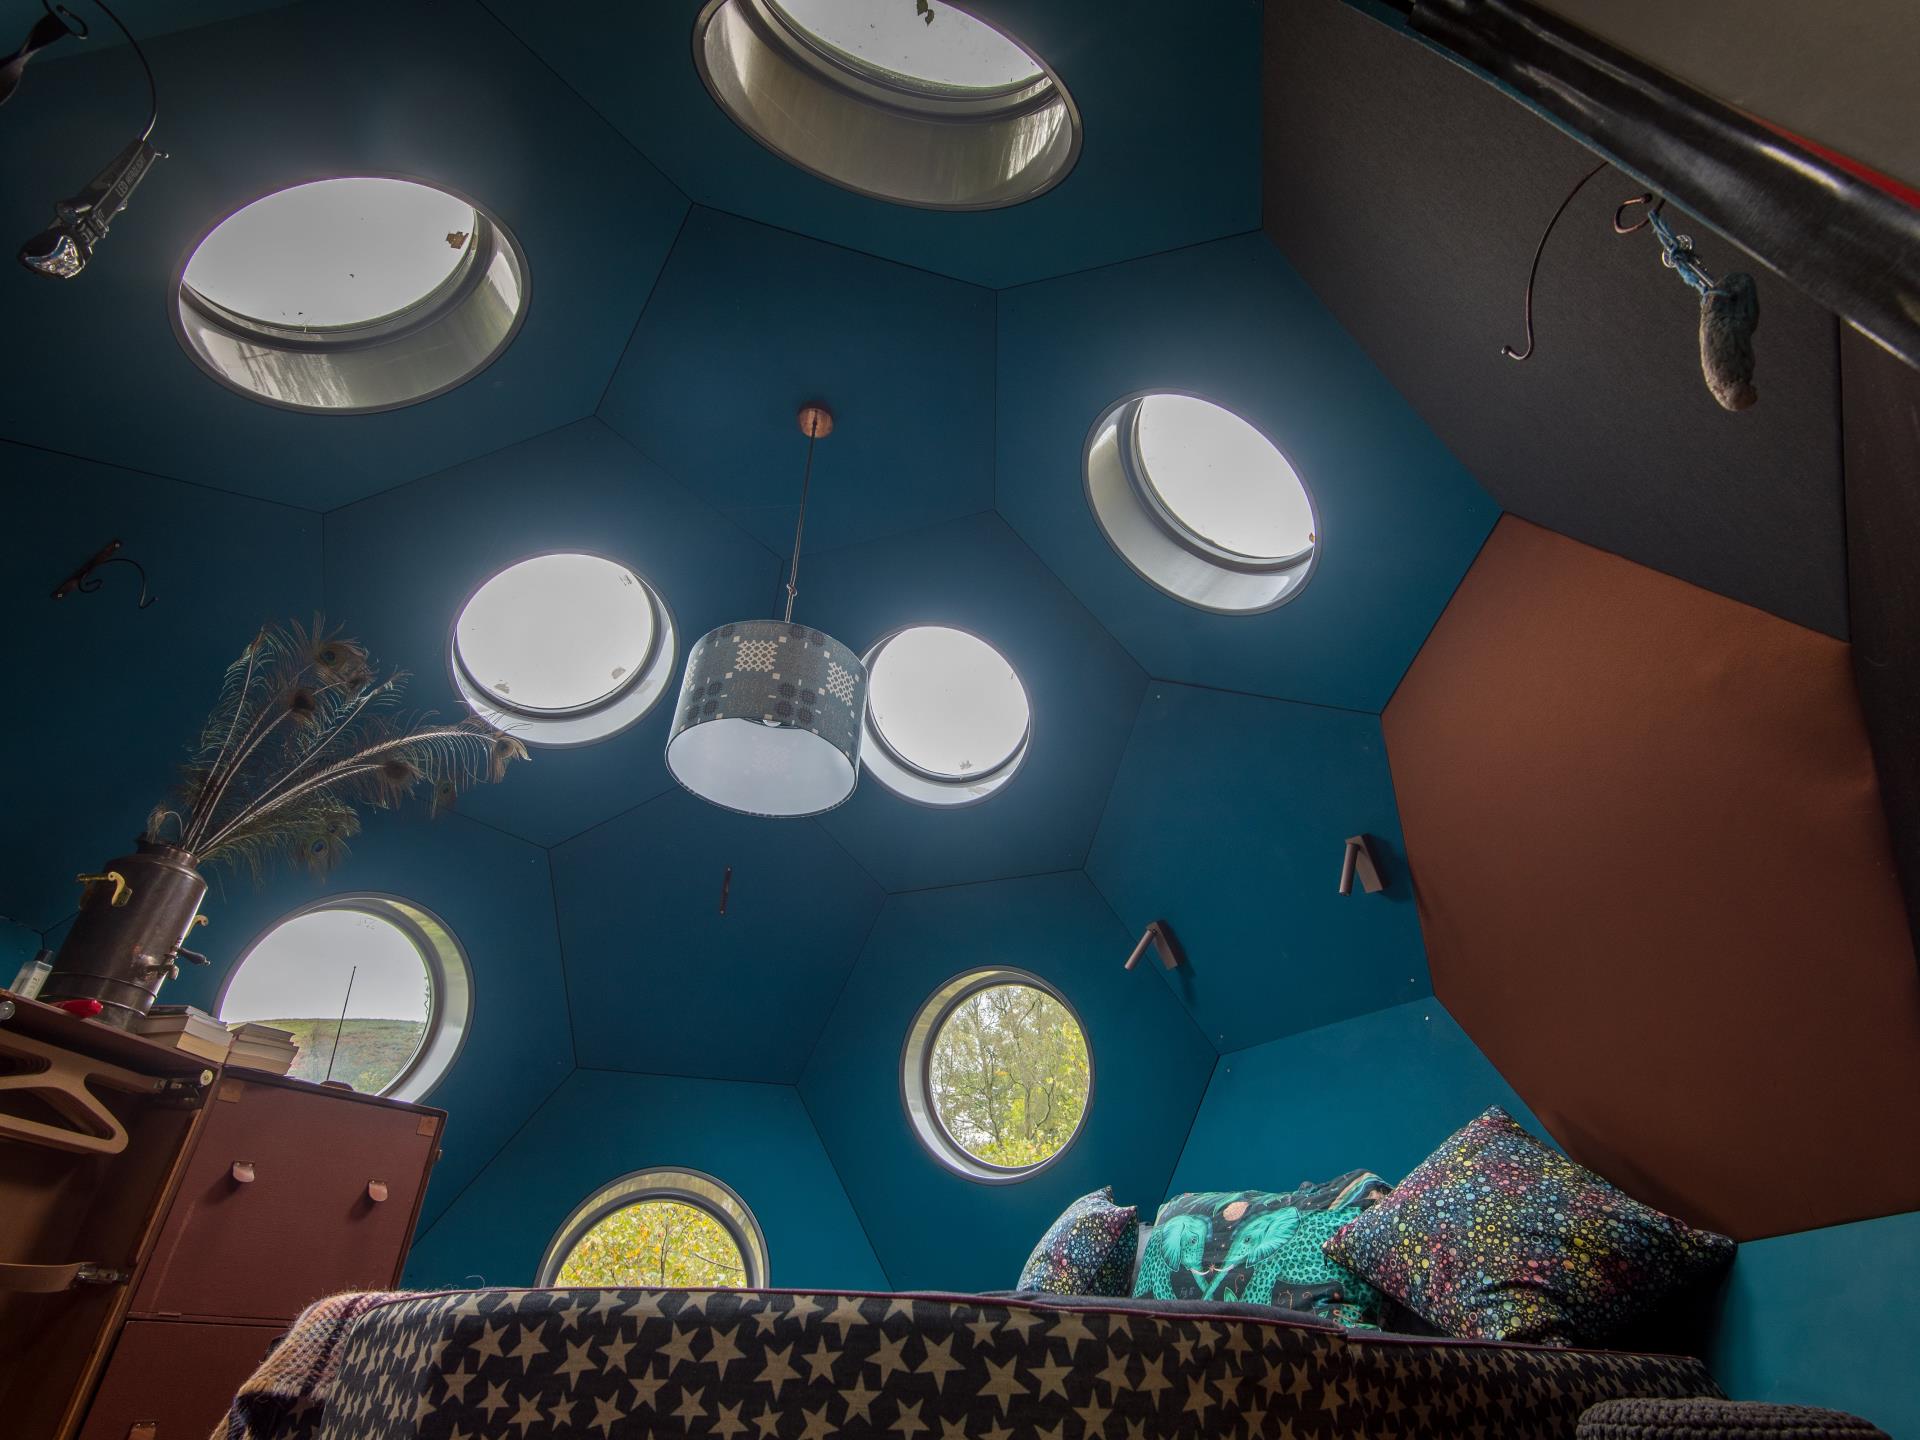 Sky portholes for Dark Skies viewing from your bed